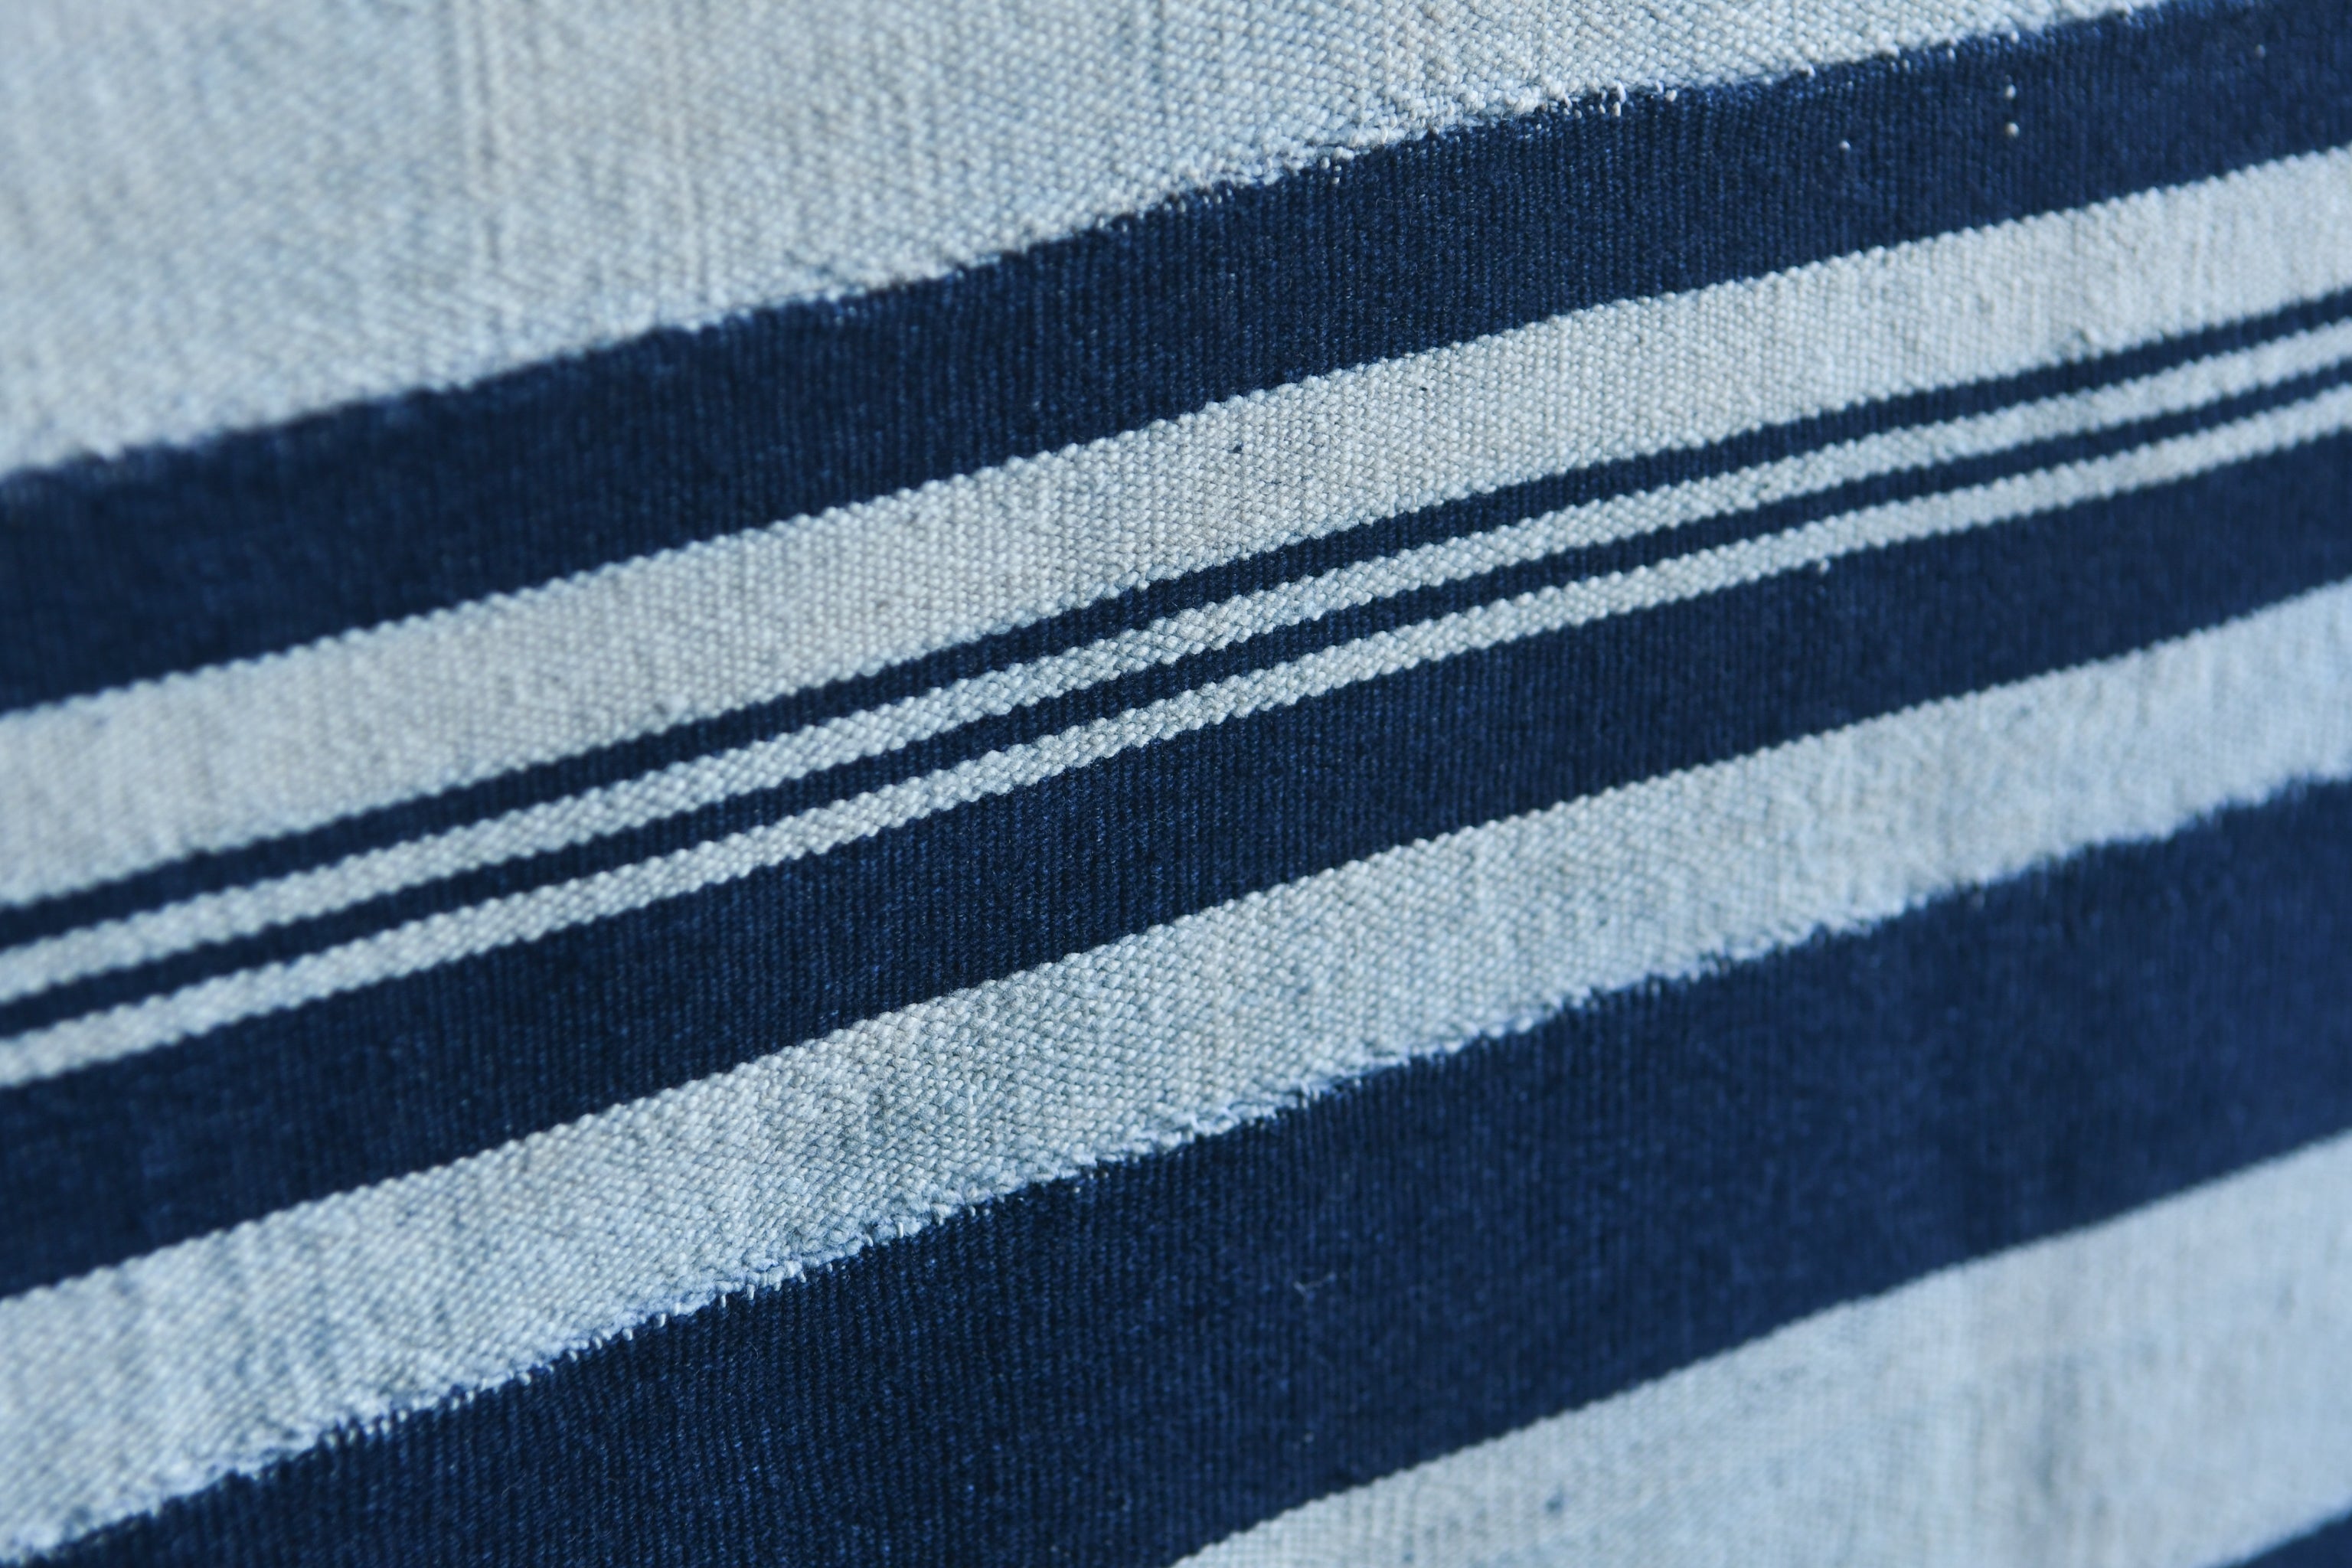 Handcrafted Textiles - Handmade - Contemporary - African Art - Home Decor - Living - African Indigo Textile - Tie Dyed Design - Blue White Stripes - Vintage Look - Crafted 100% Cotton Fabric - Stylish Garments - Home Decor - Timeless Style